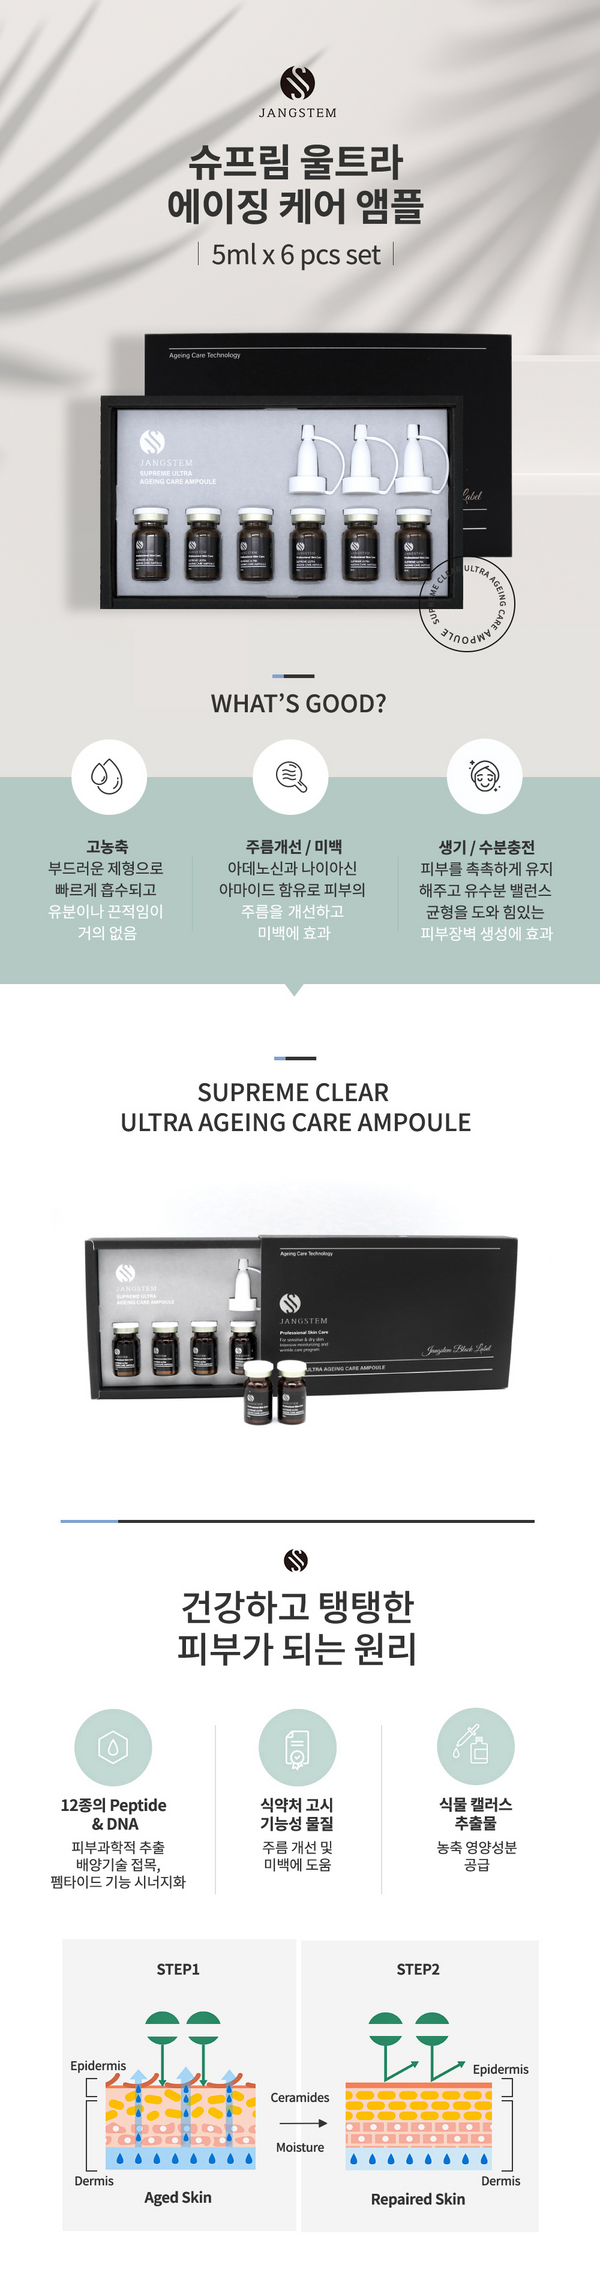 Jangsterm Supreme Ultra Ageing Care Ampoule